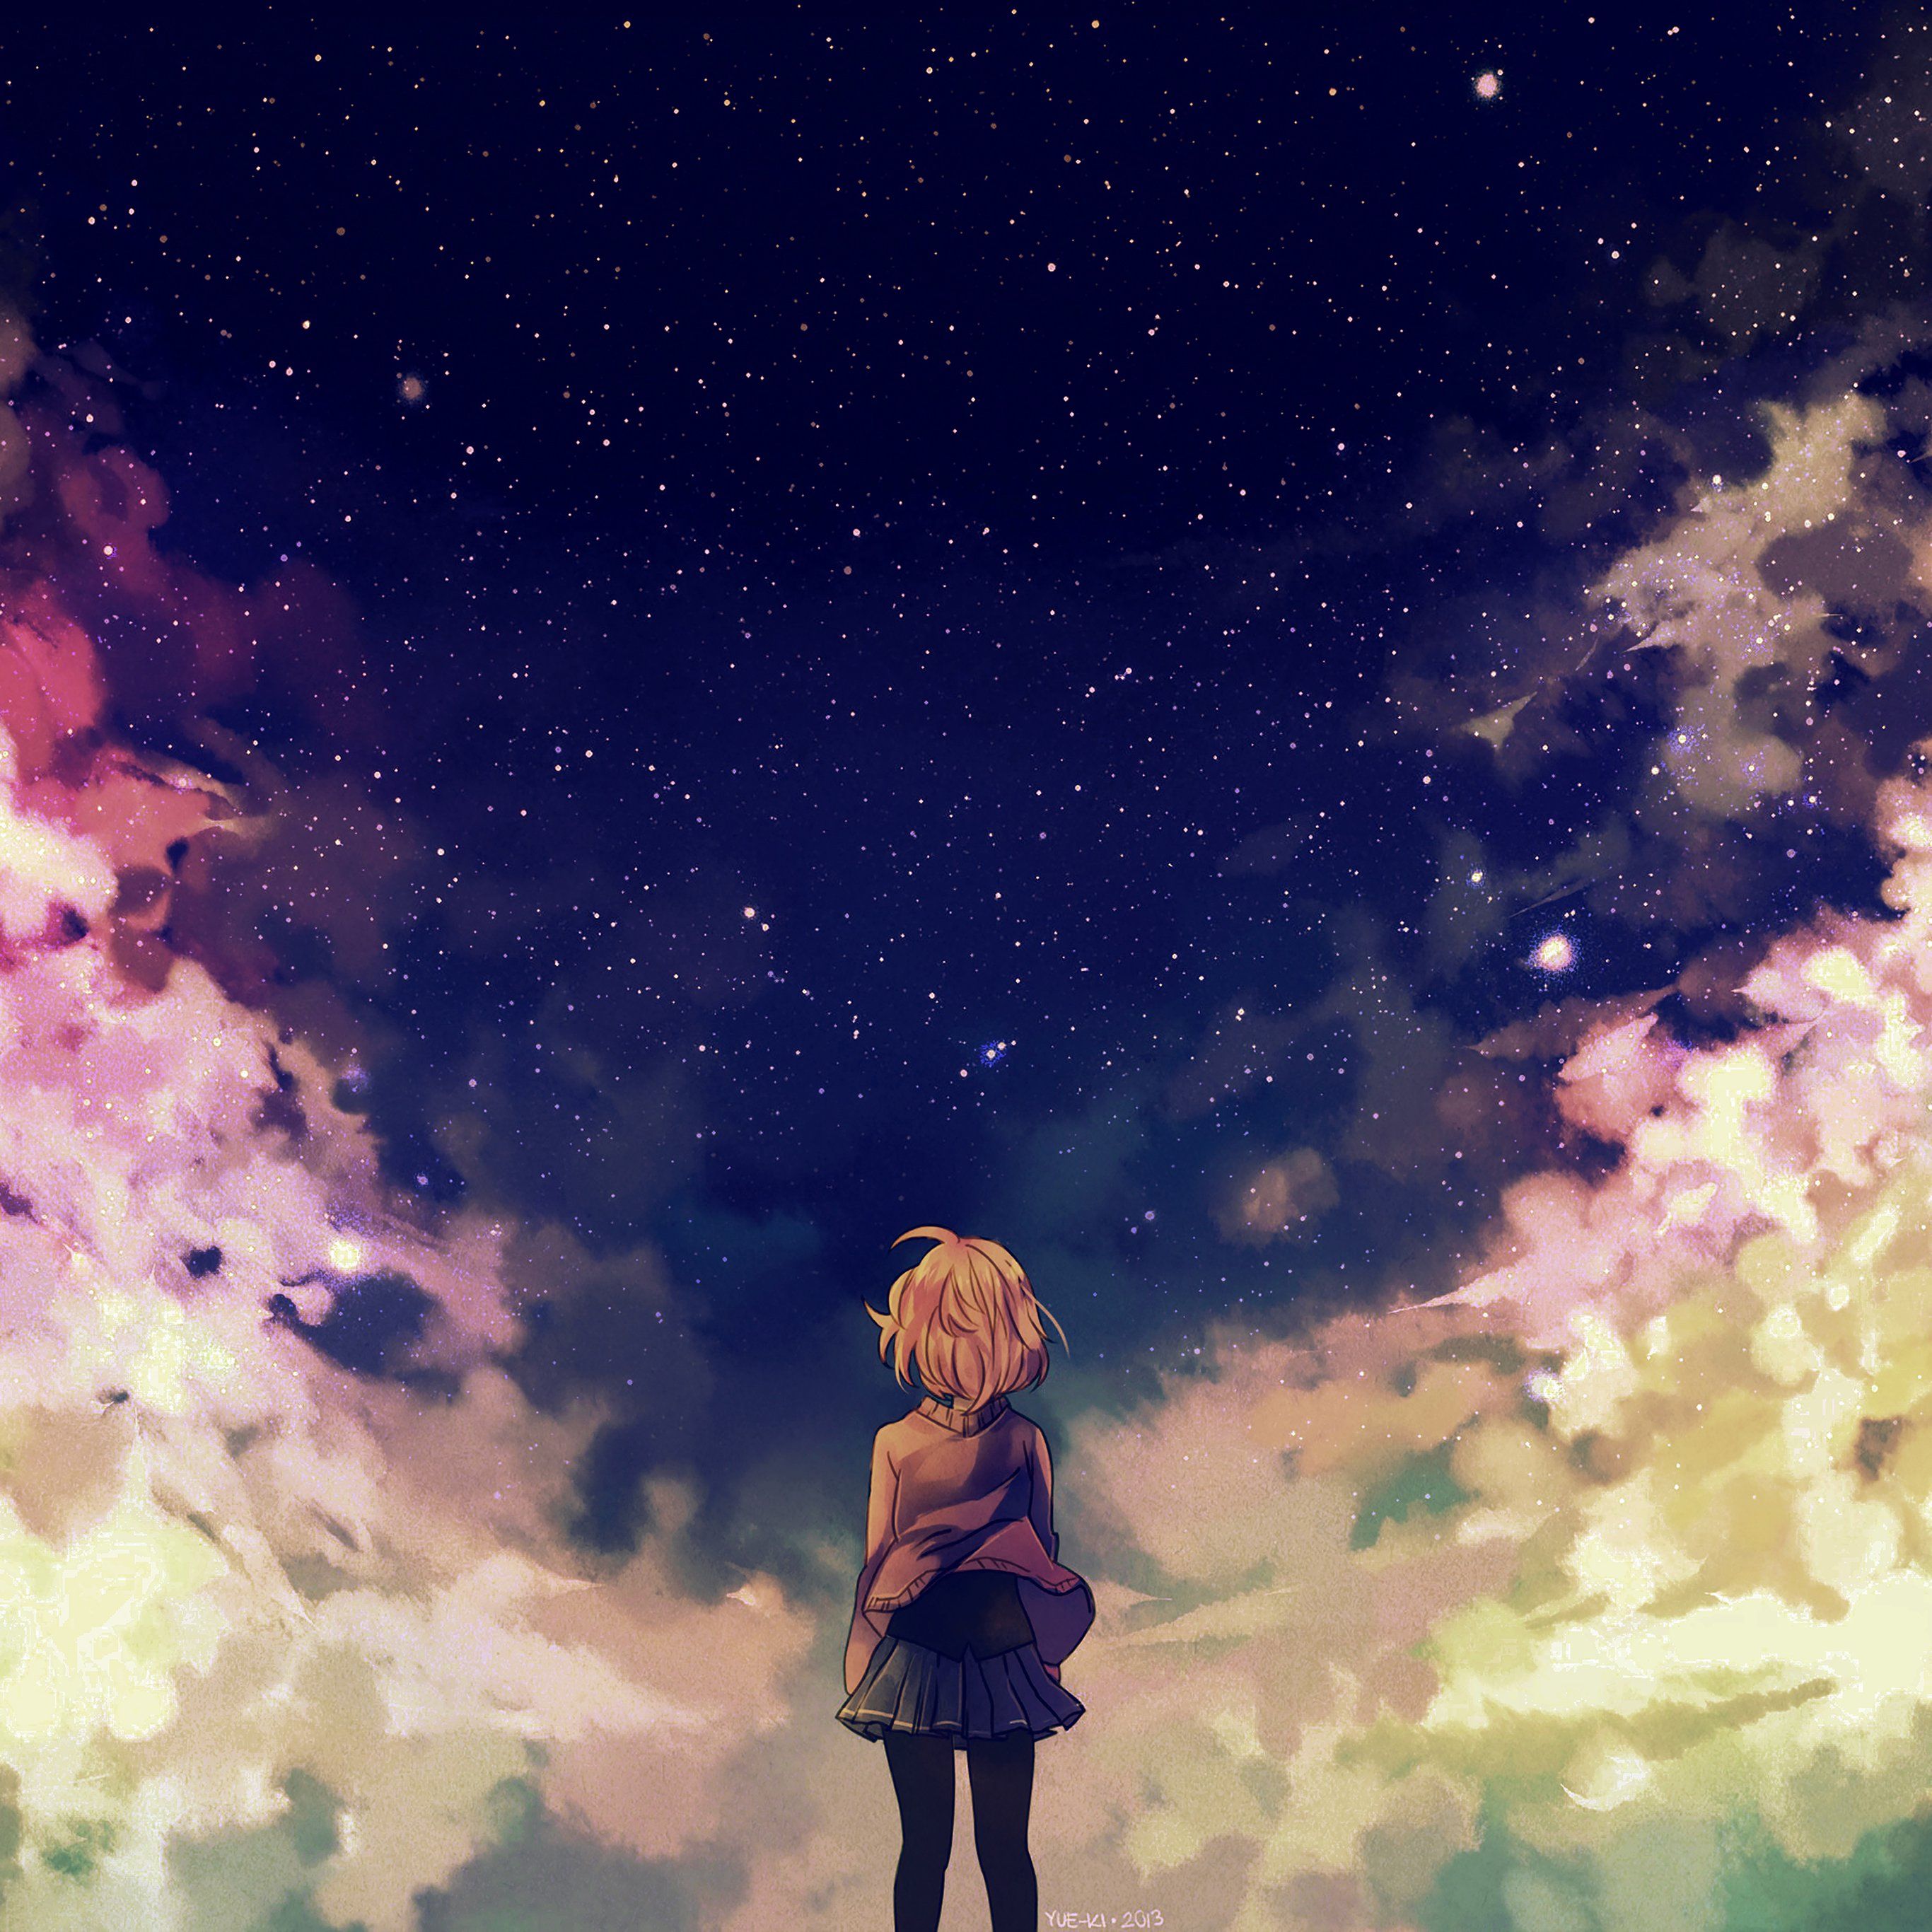 Anime Space Girl Wallpaper Free Anime Space Girl Background